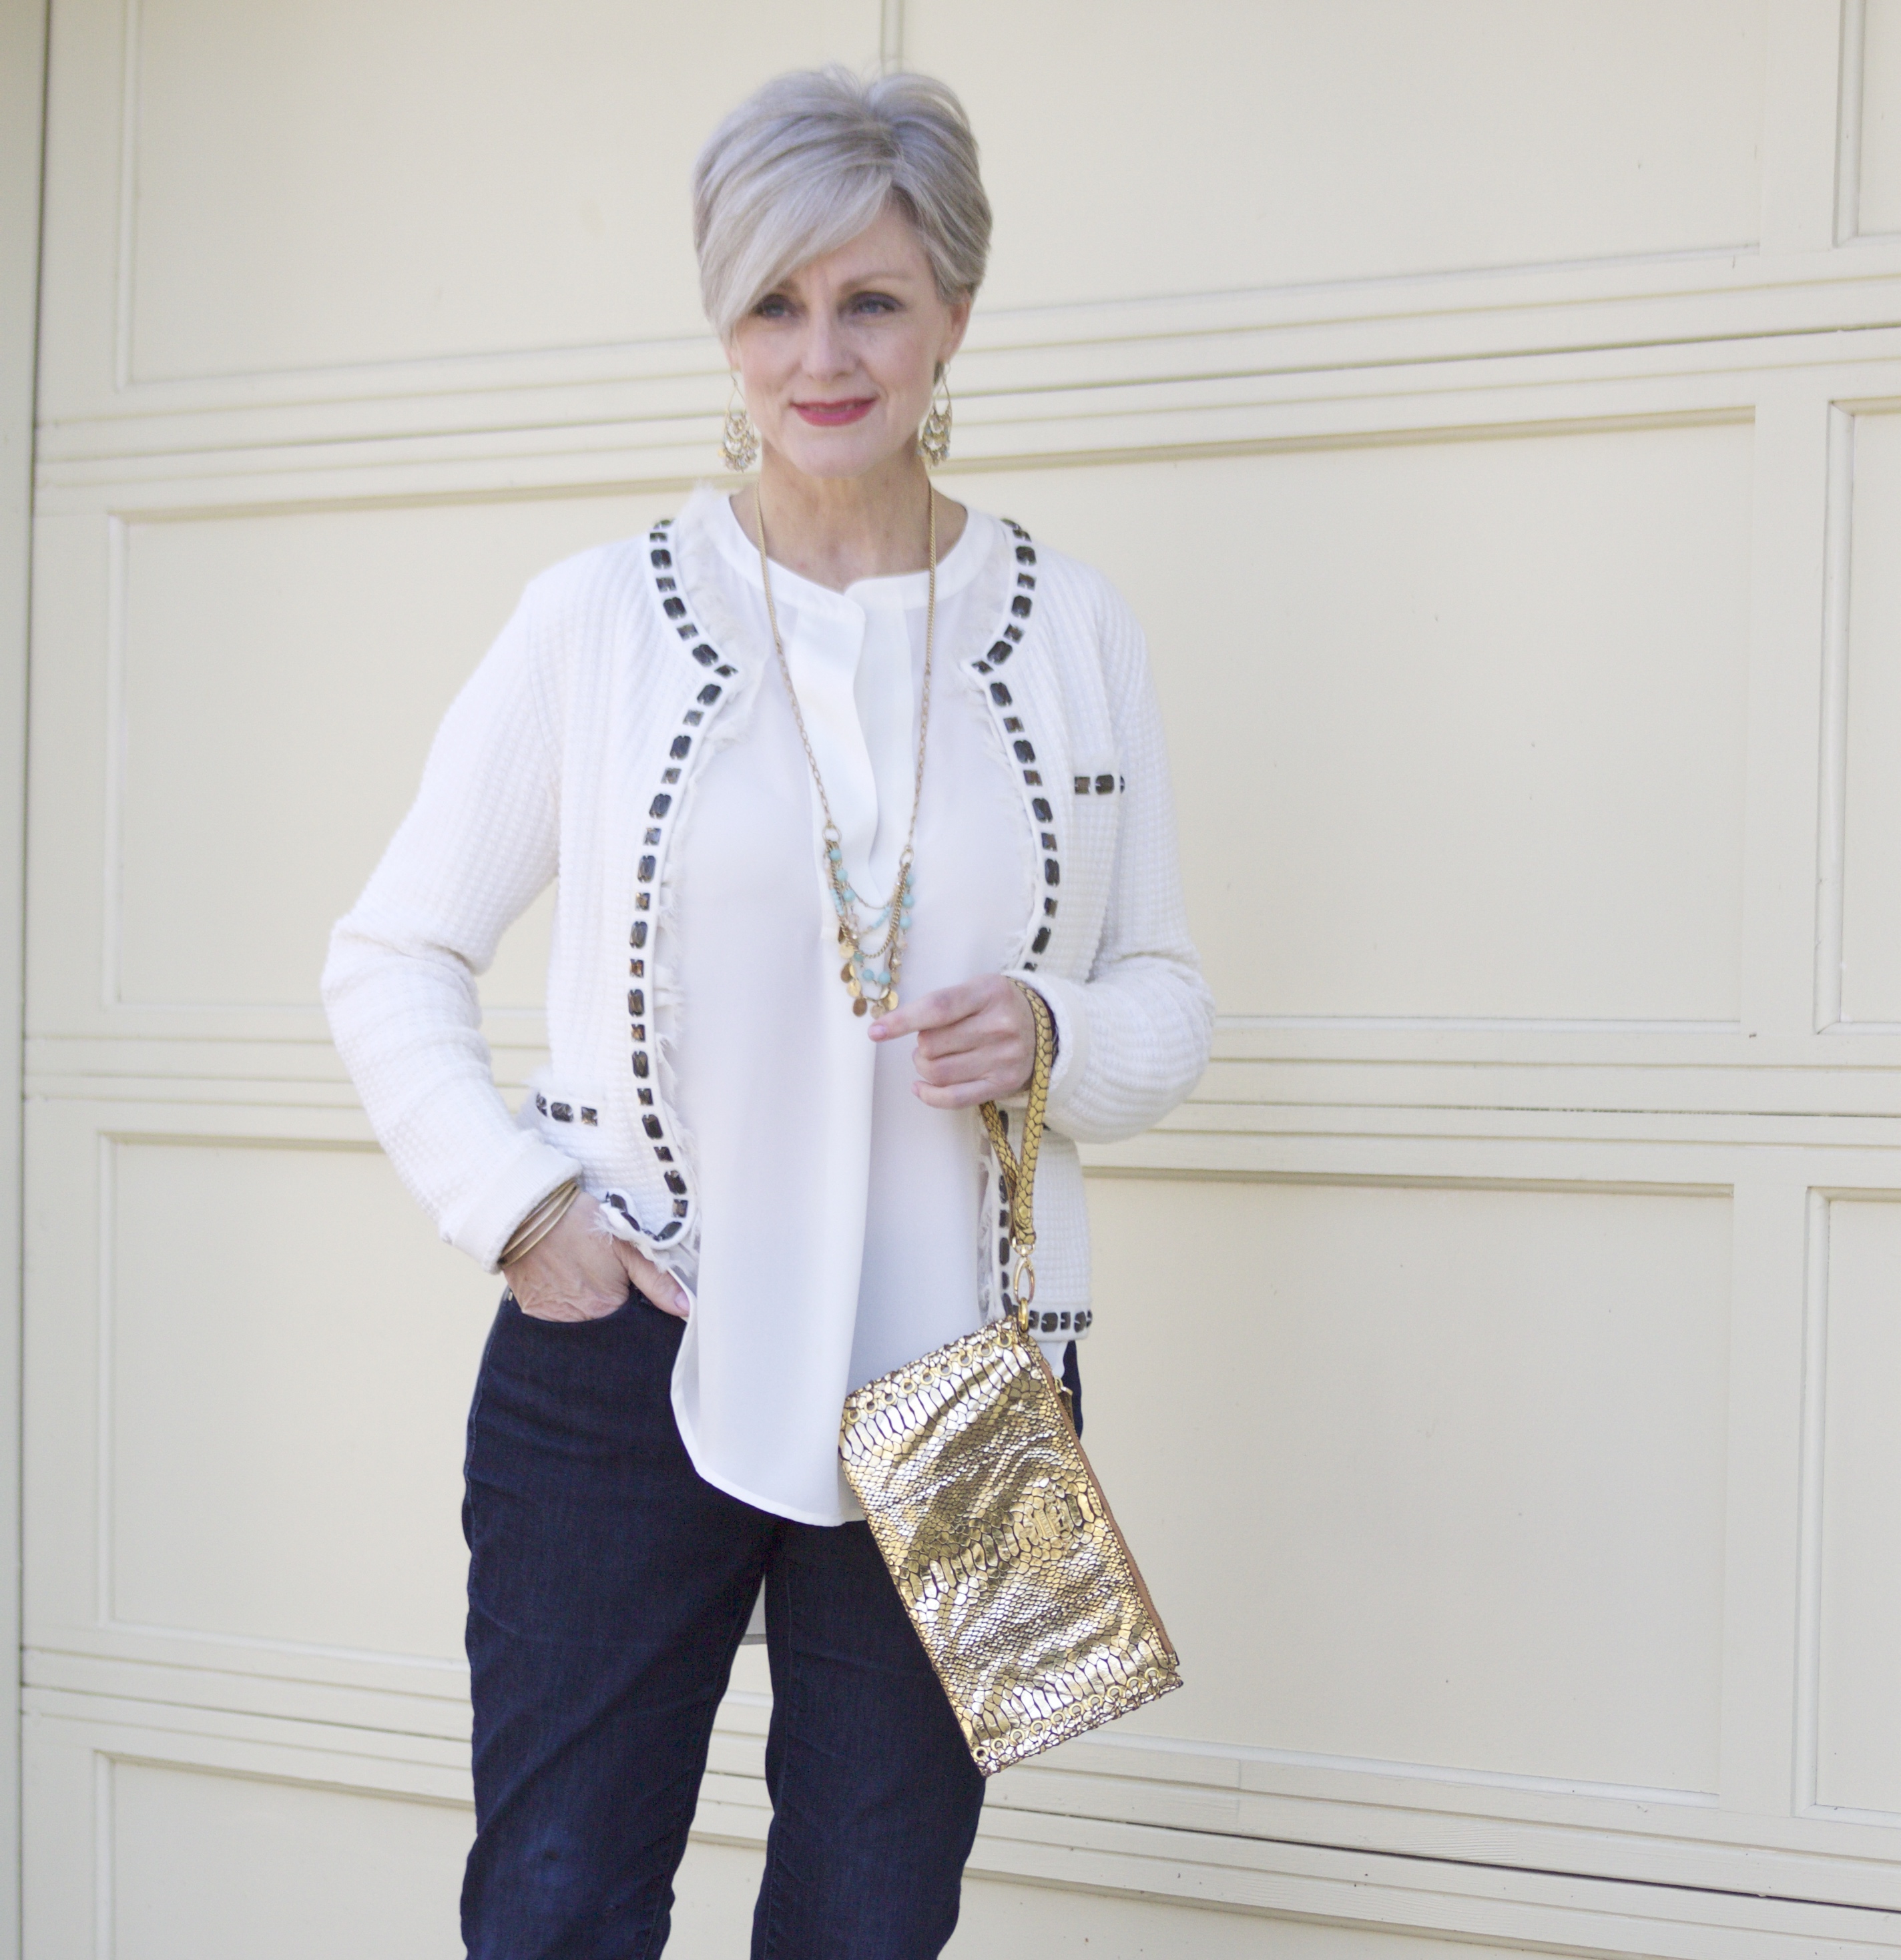 winding down | Style at a Certain Age